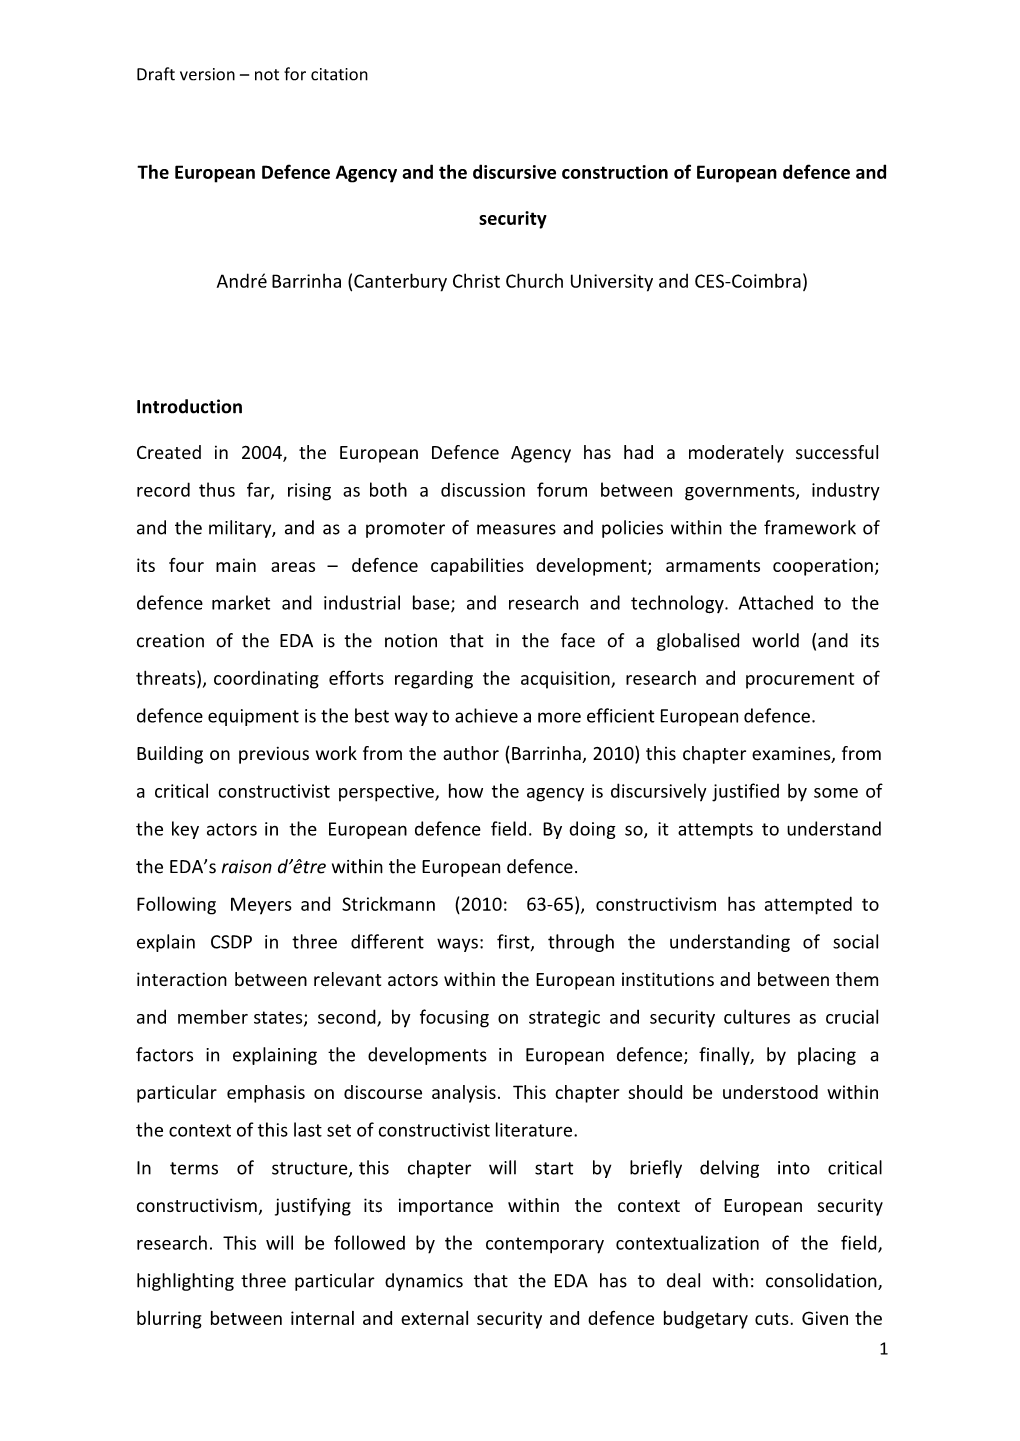 The European Defence Agency and the Discursive Construction of European Defence and Security André Barrinha